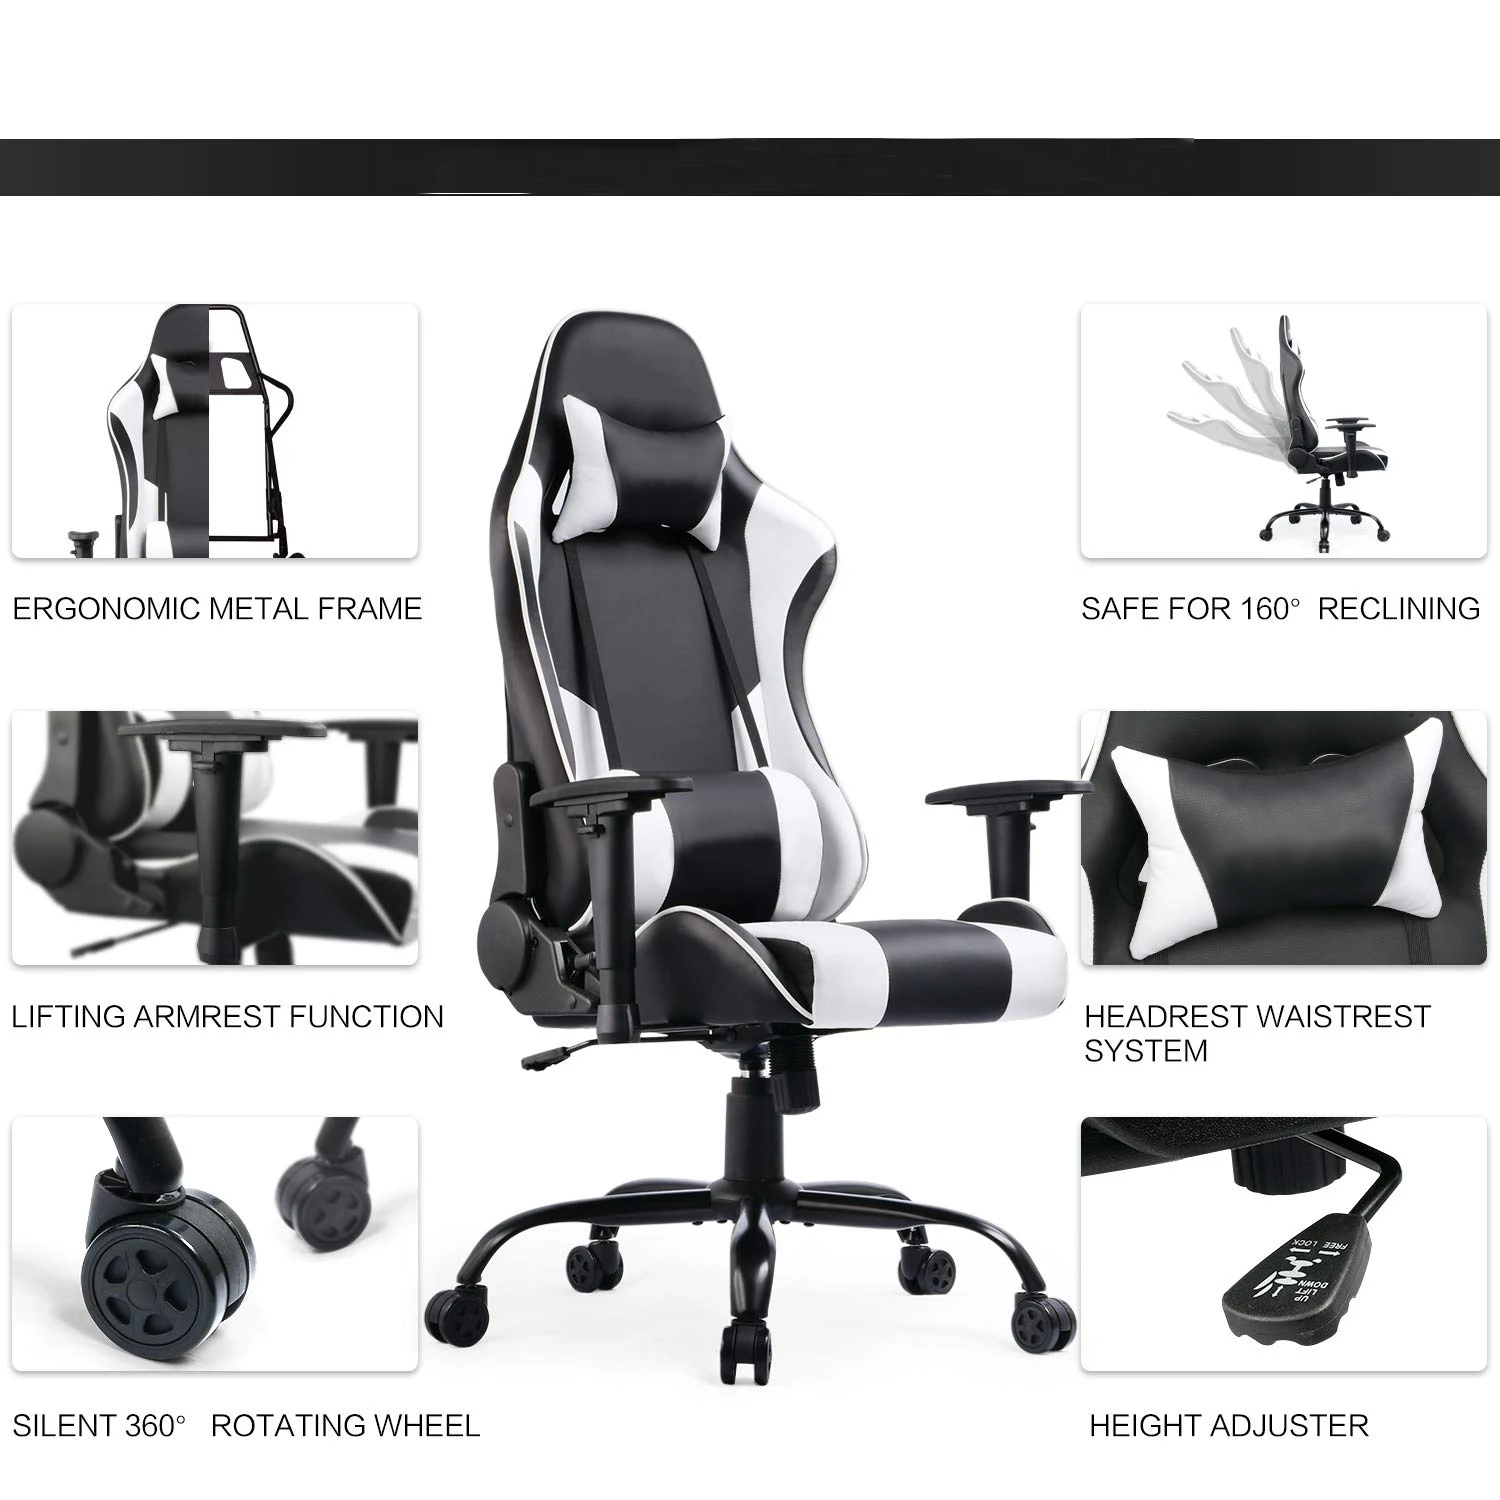 PU Leather oem Gaming Chair computer Racing gaming chair computer